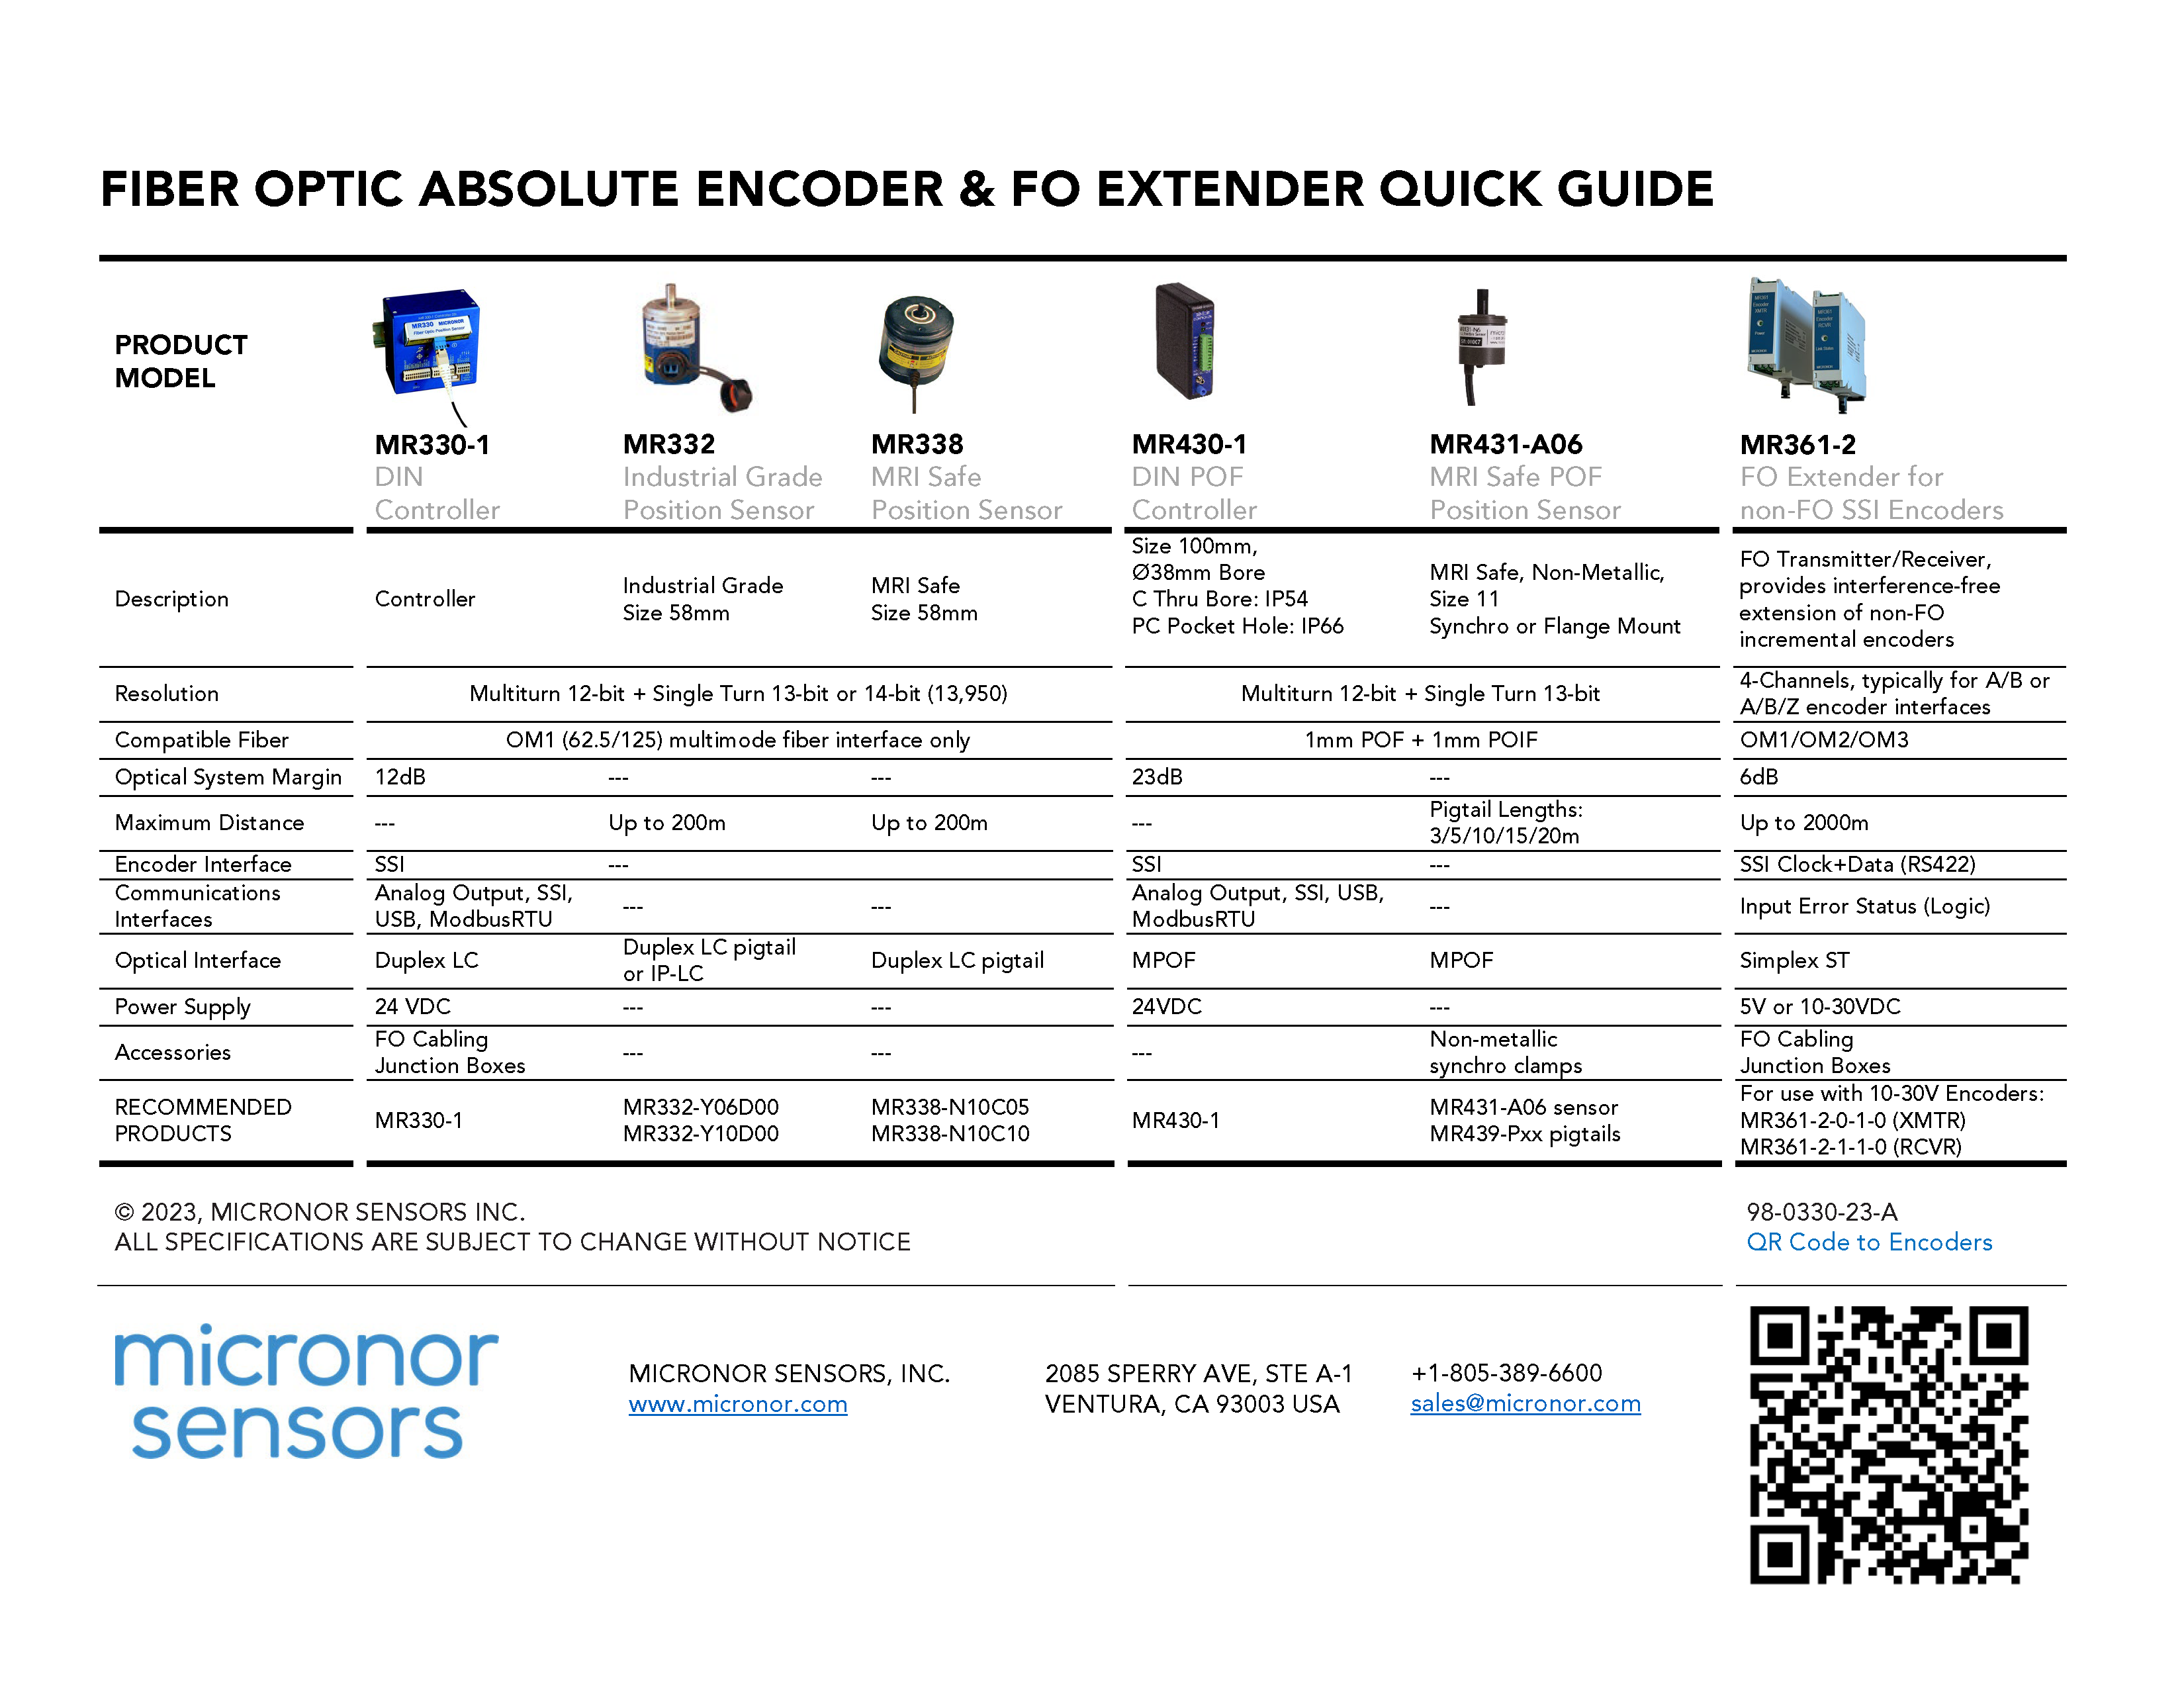 Quick Guide for FO Absolute Encoders and FO SSI Encoder Extender System